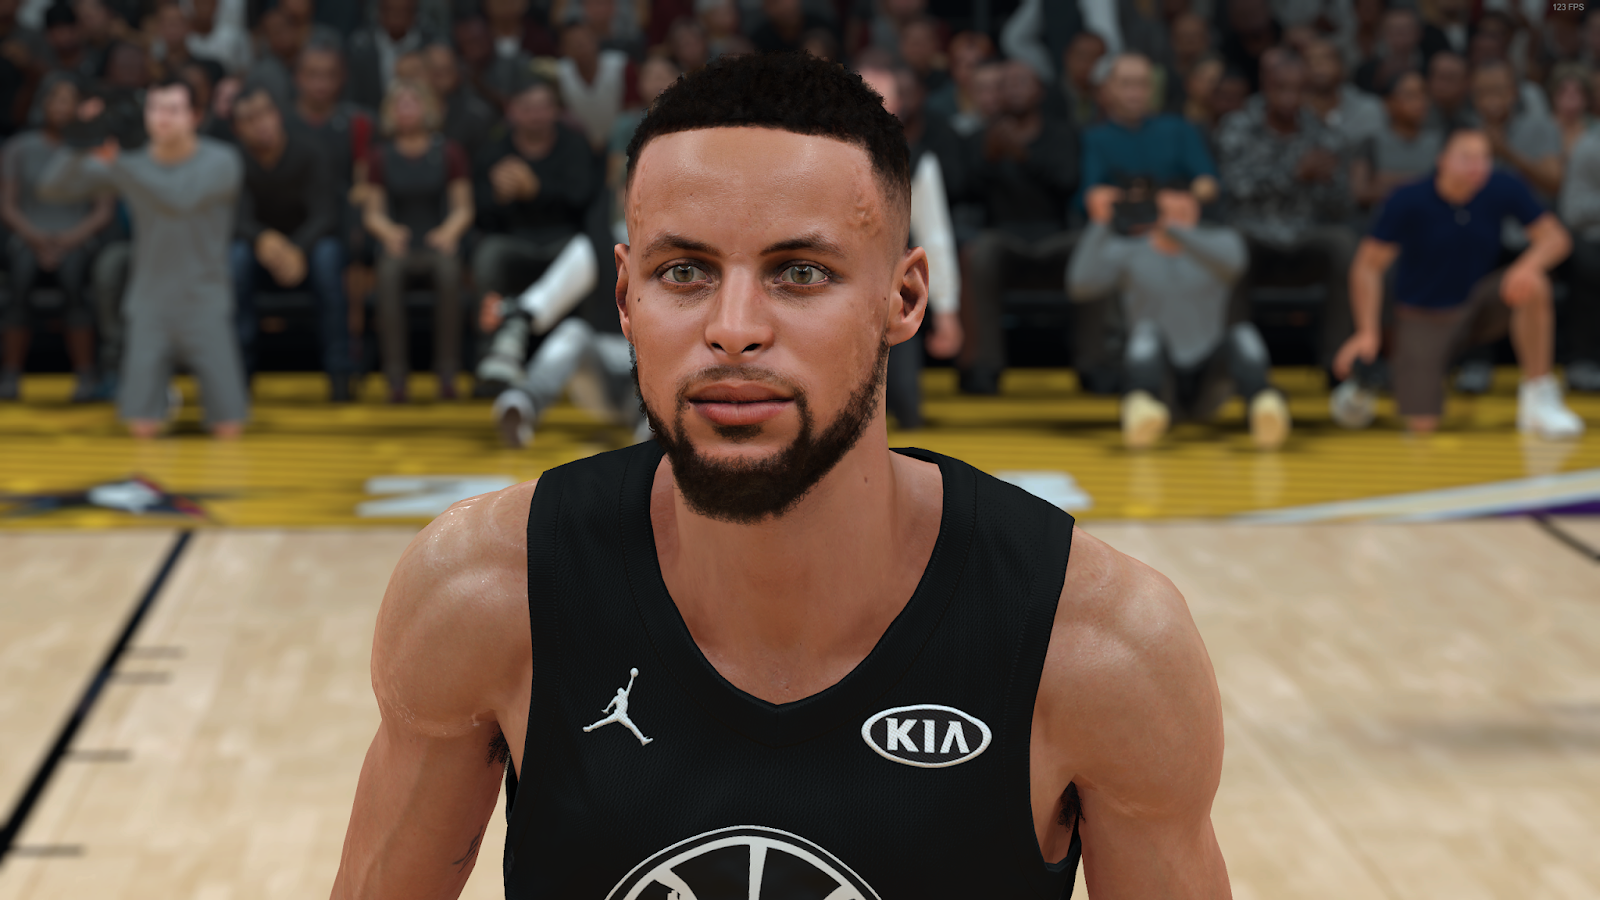 NBA 2K18 Stephen Curry Cyberface by MRK326 RELEASED - DNA Of Basketball | Shuajota´s Blog1600 x 900